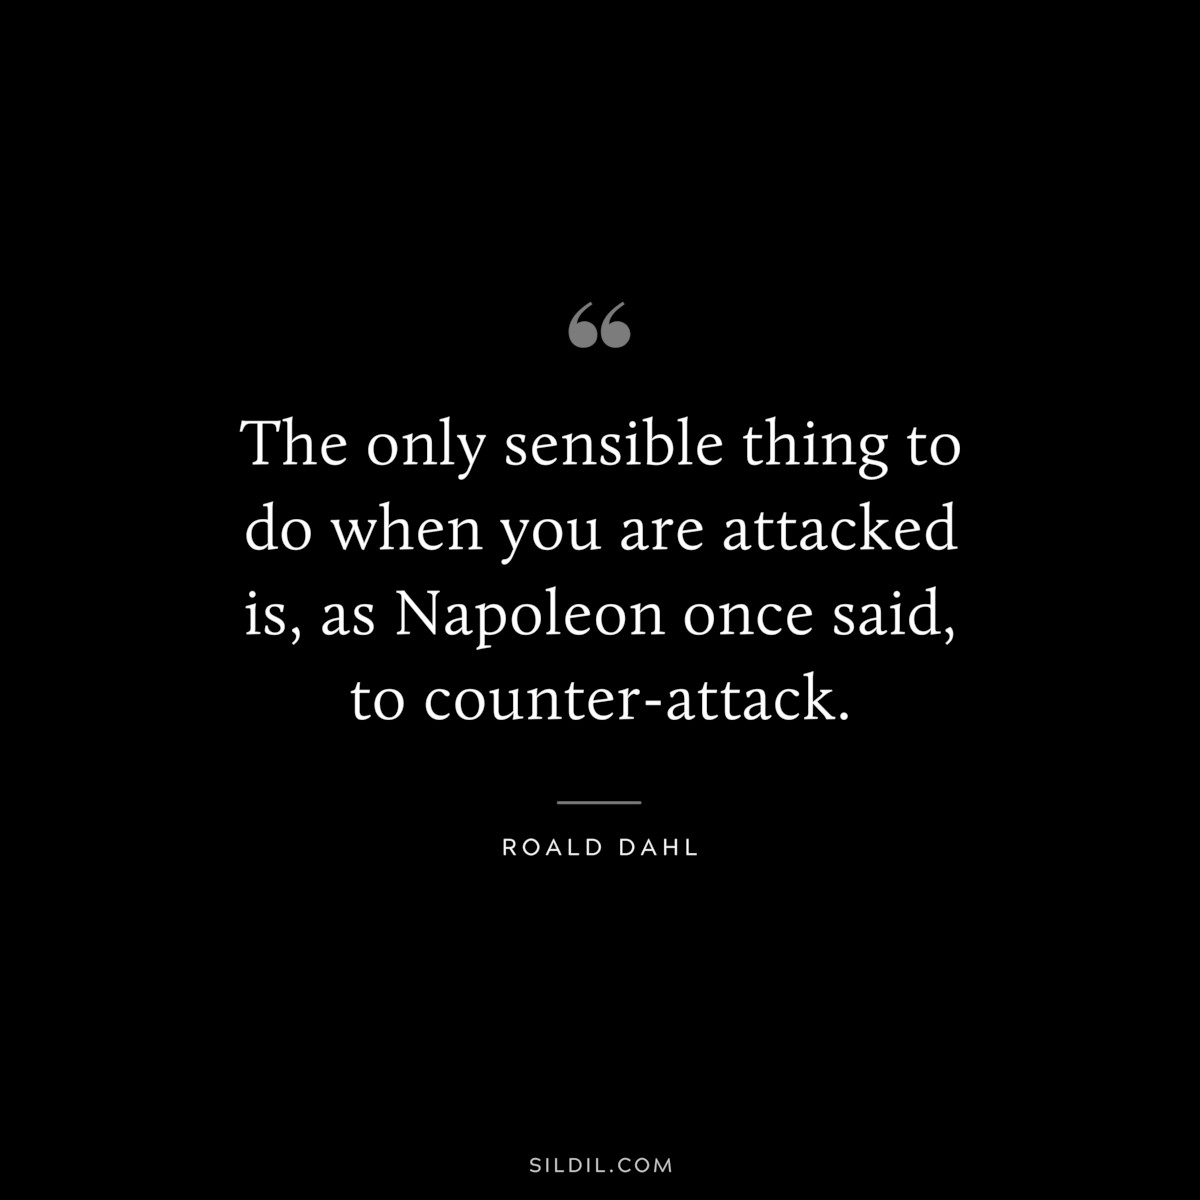 The only sensible thing to do when you are attacked is, as Napoleon once said, to counter-attack. ― Roald Dahl